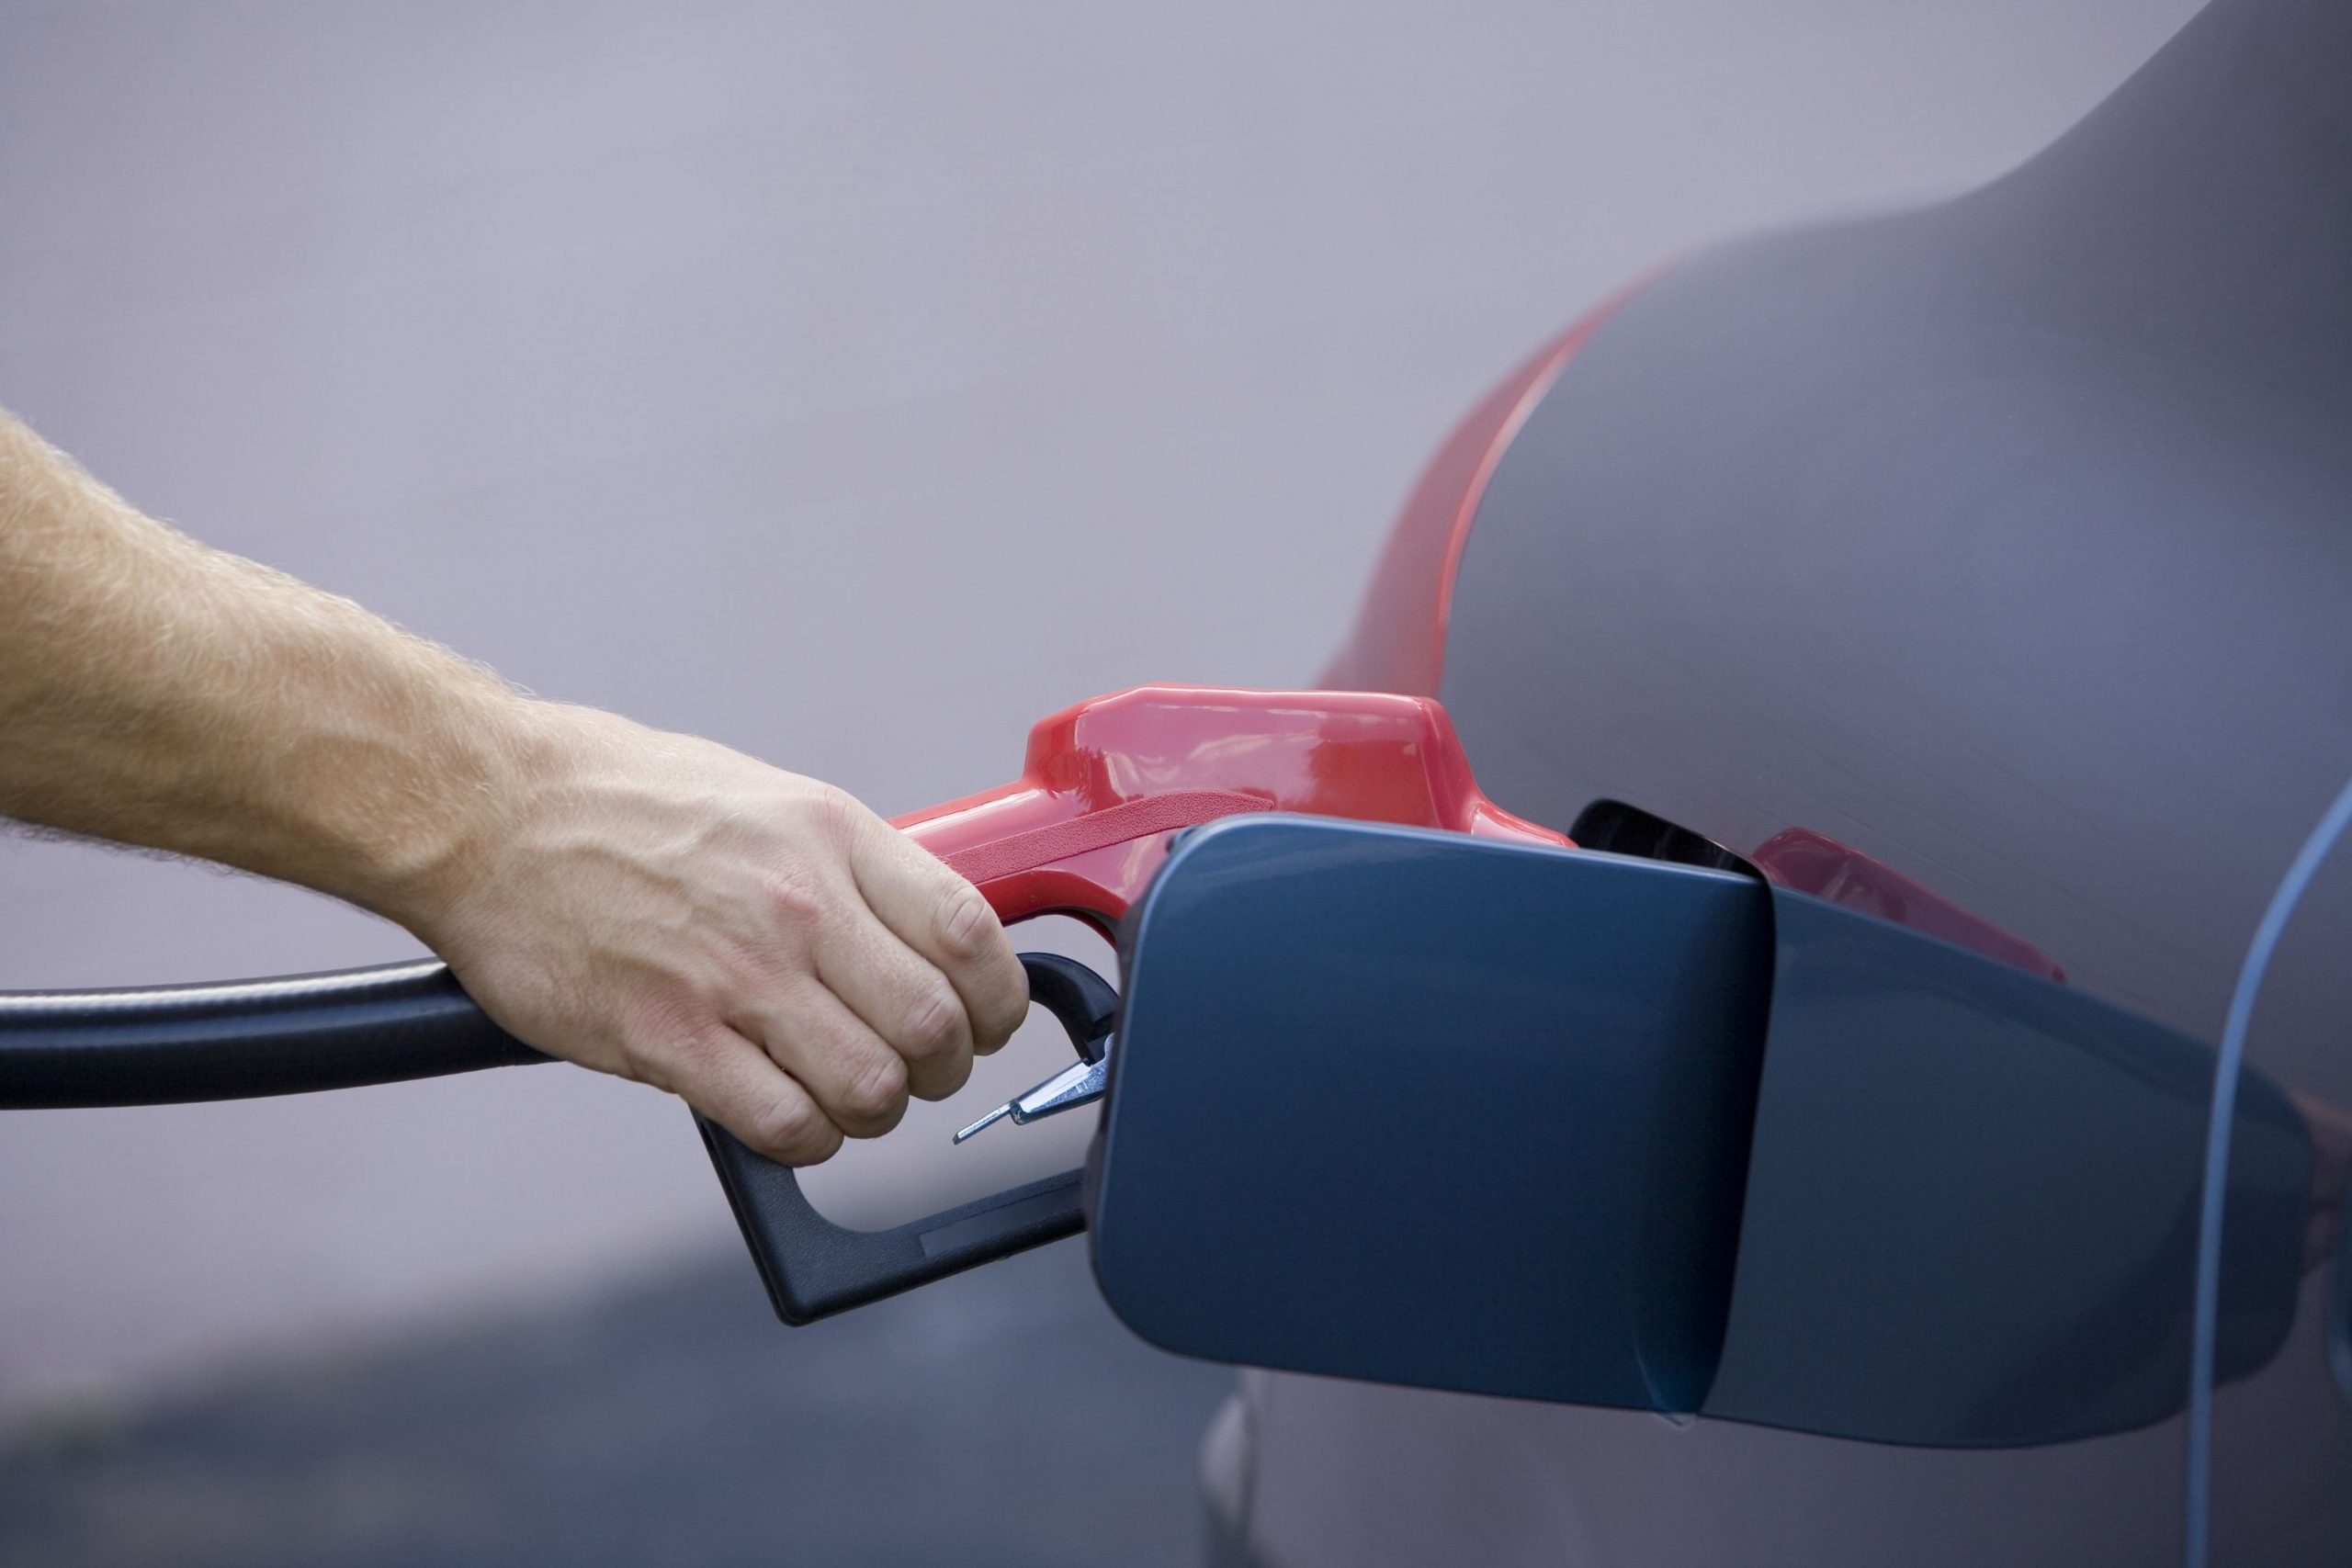 Extra Tips On Getting Gasoline Smell Off Hands